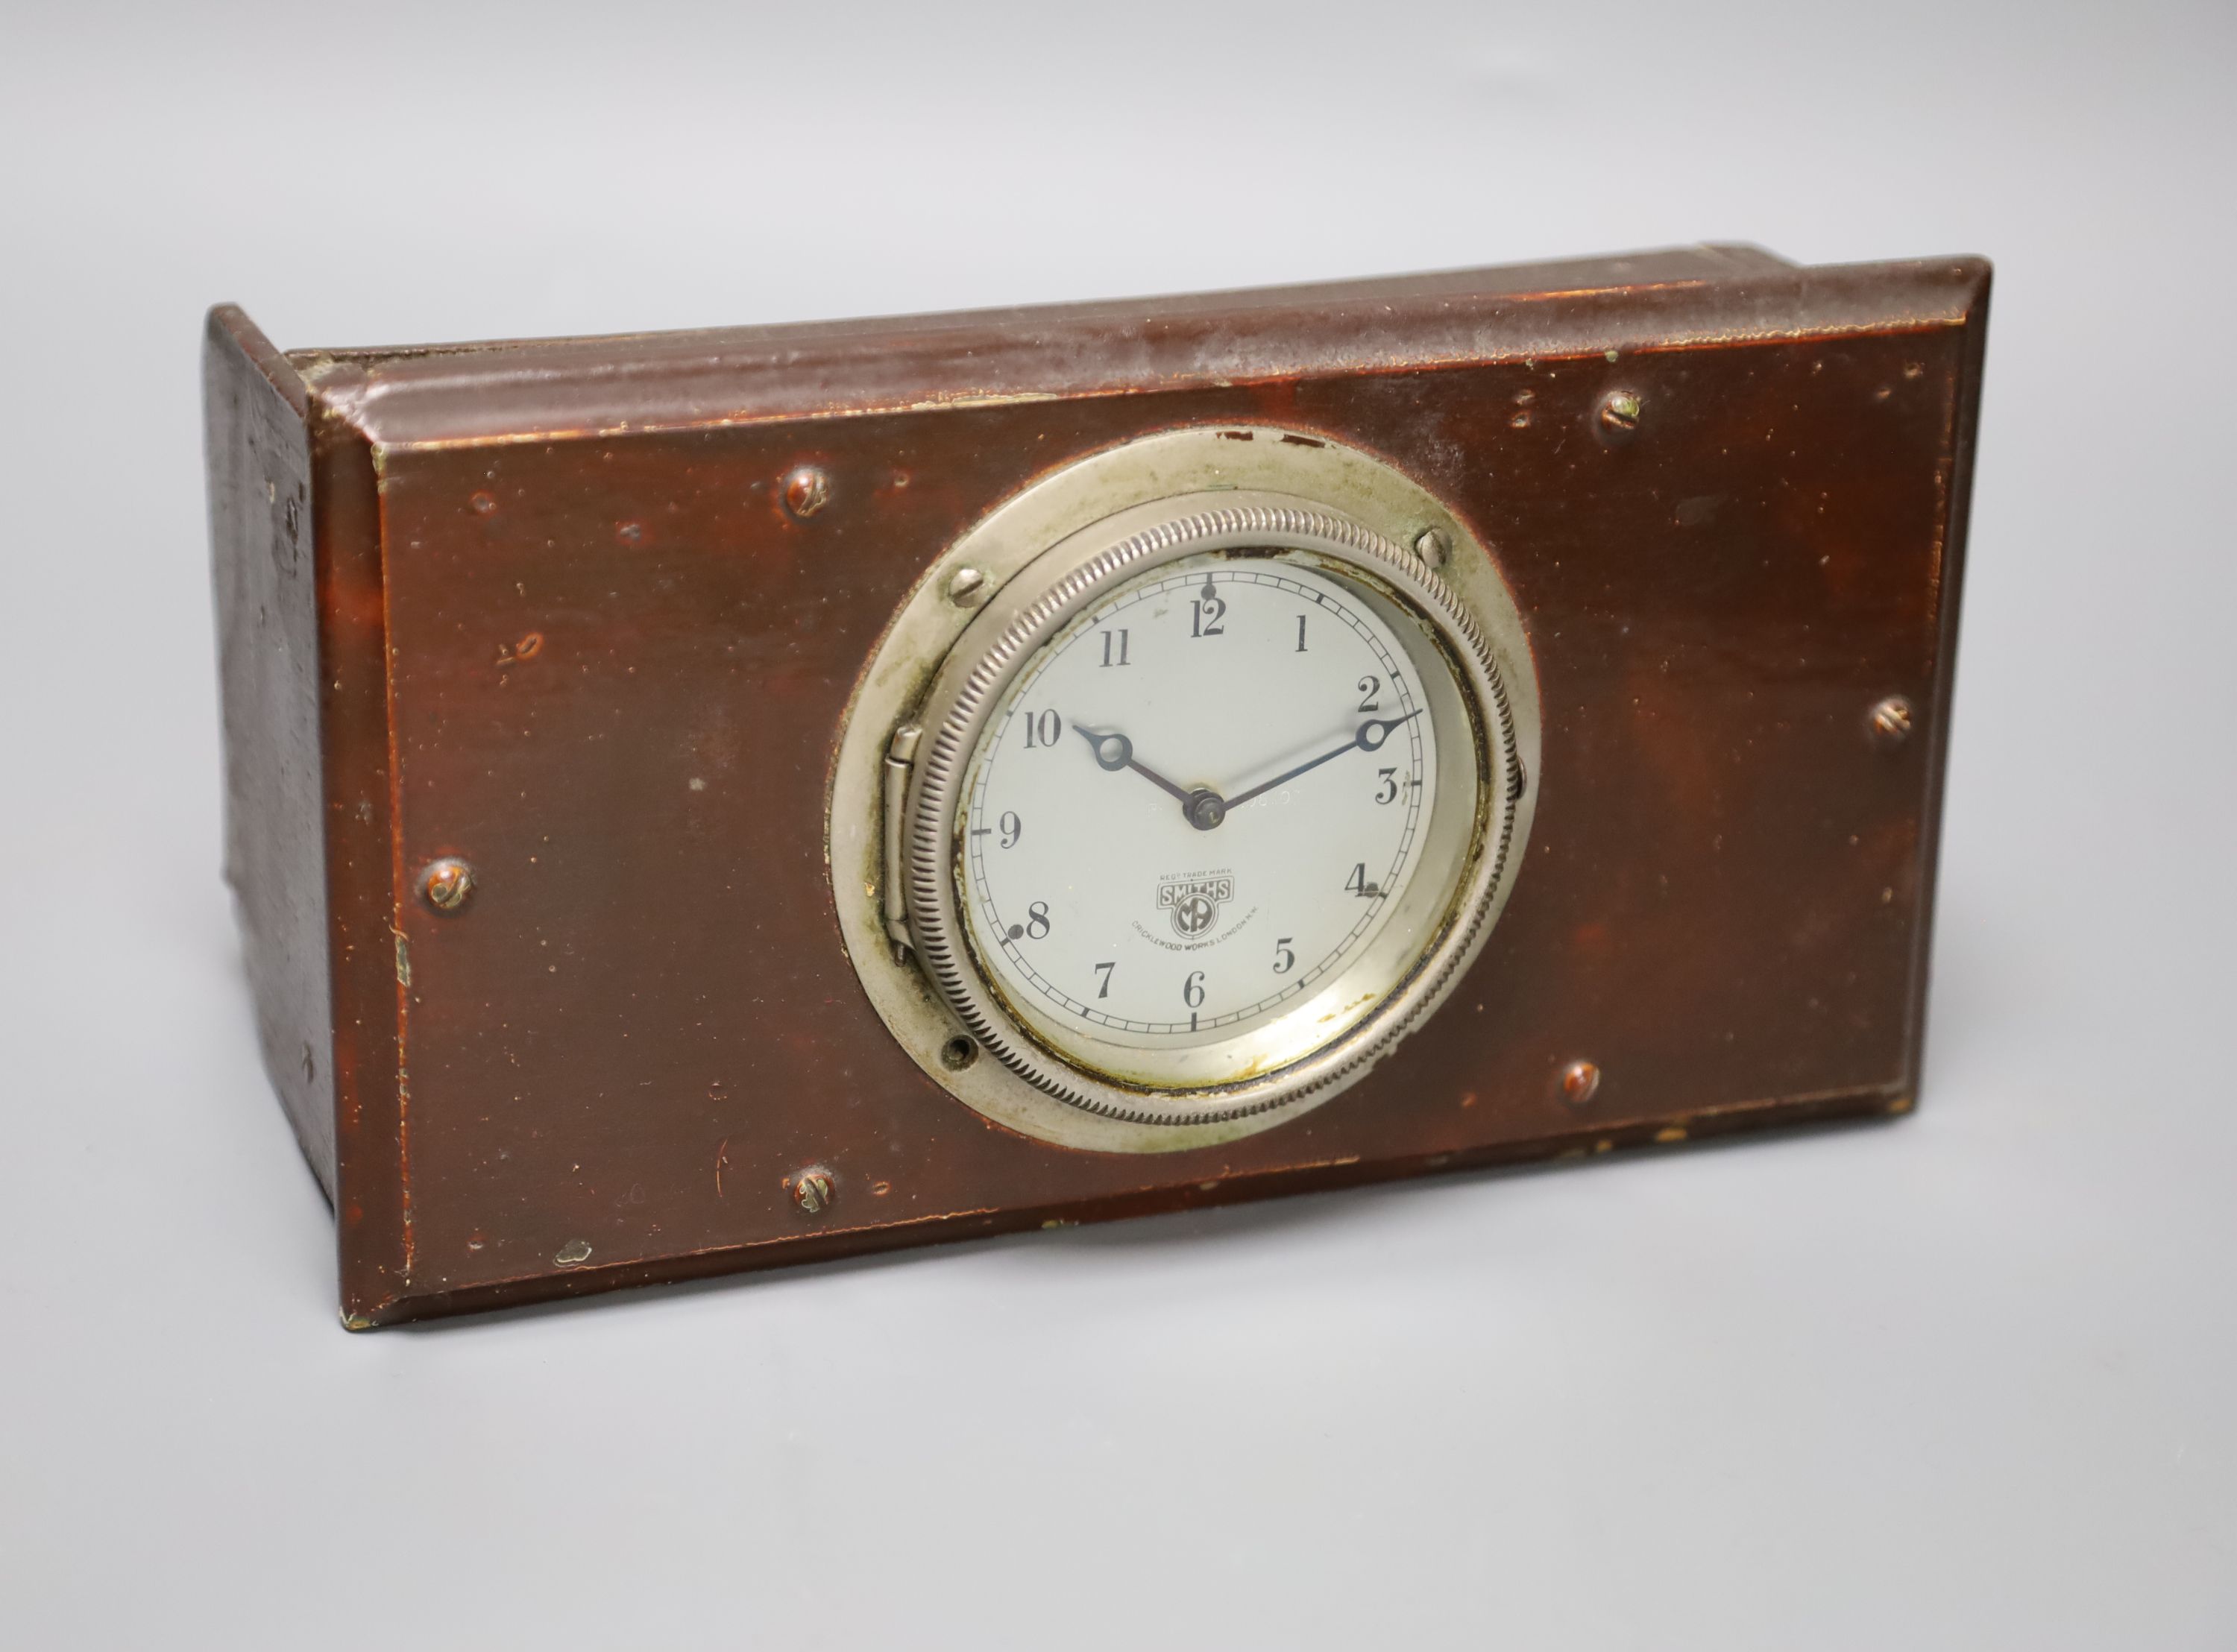 A Smiths clock taken out of the dashboard of Alfred Charles Lesters (1889-1968) Clyno Tourer car, c.1925